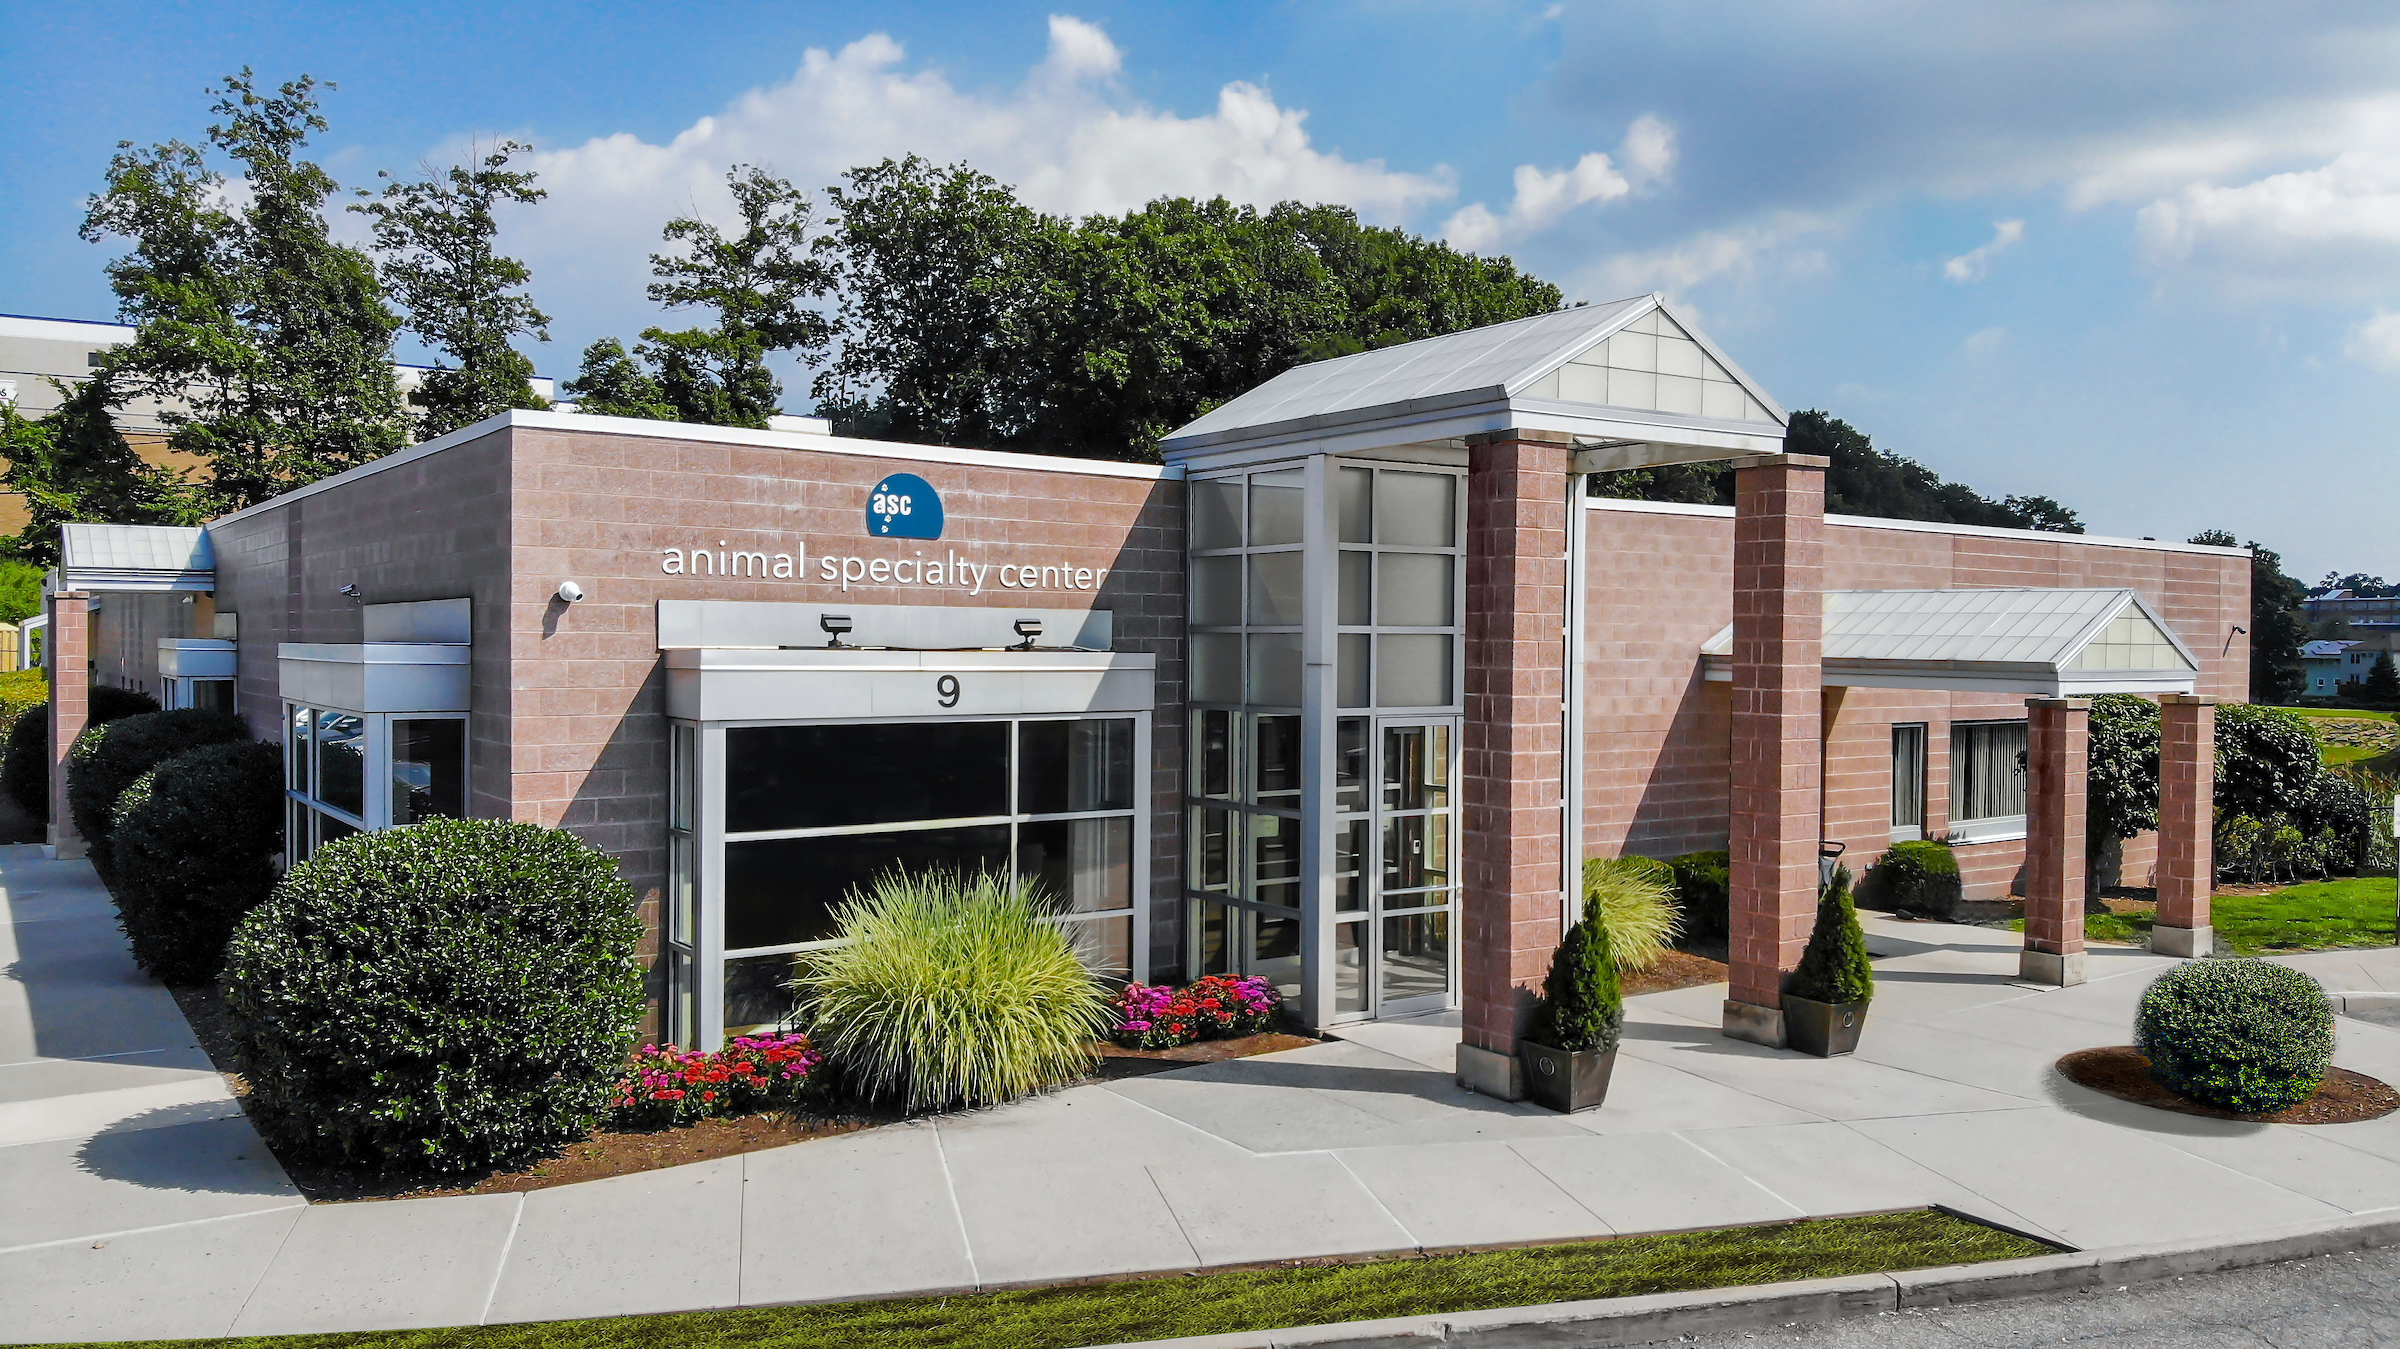 Animal Specialty Center reviews | 9 Odell Plaza - Yonkers NY